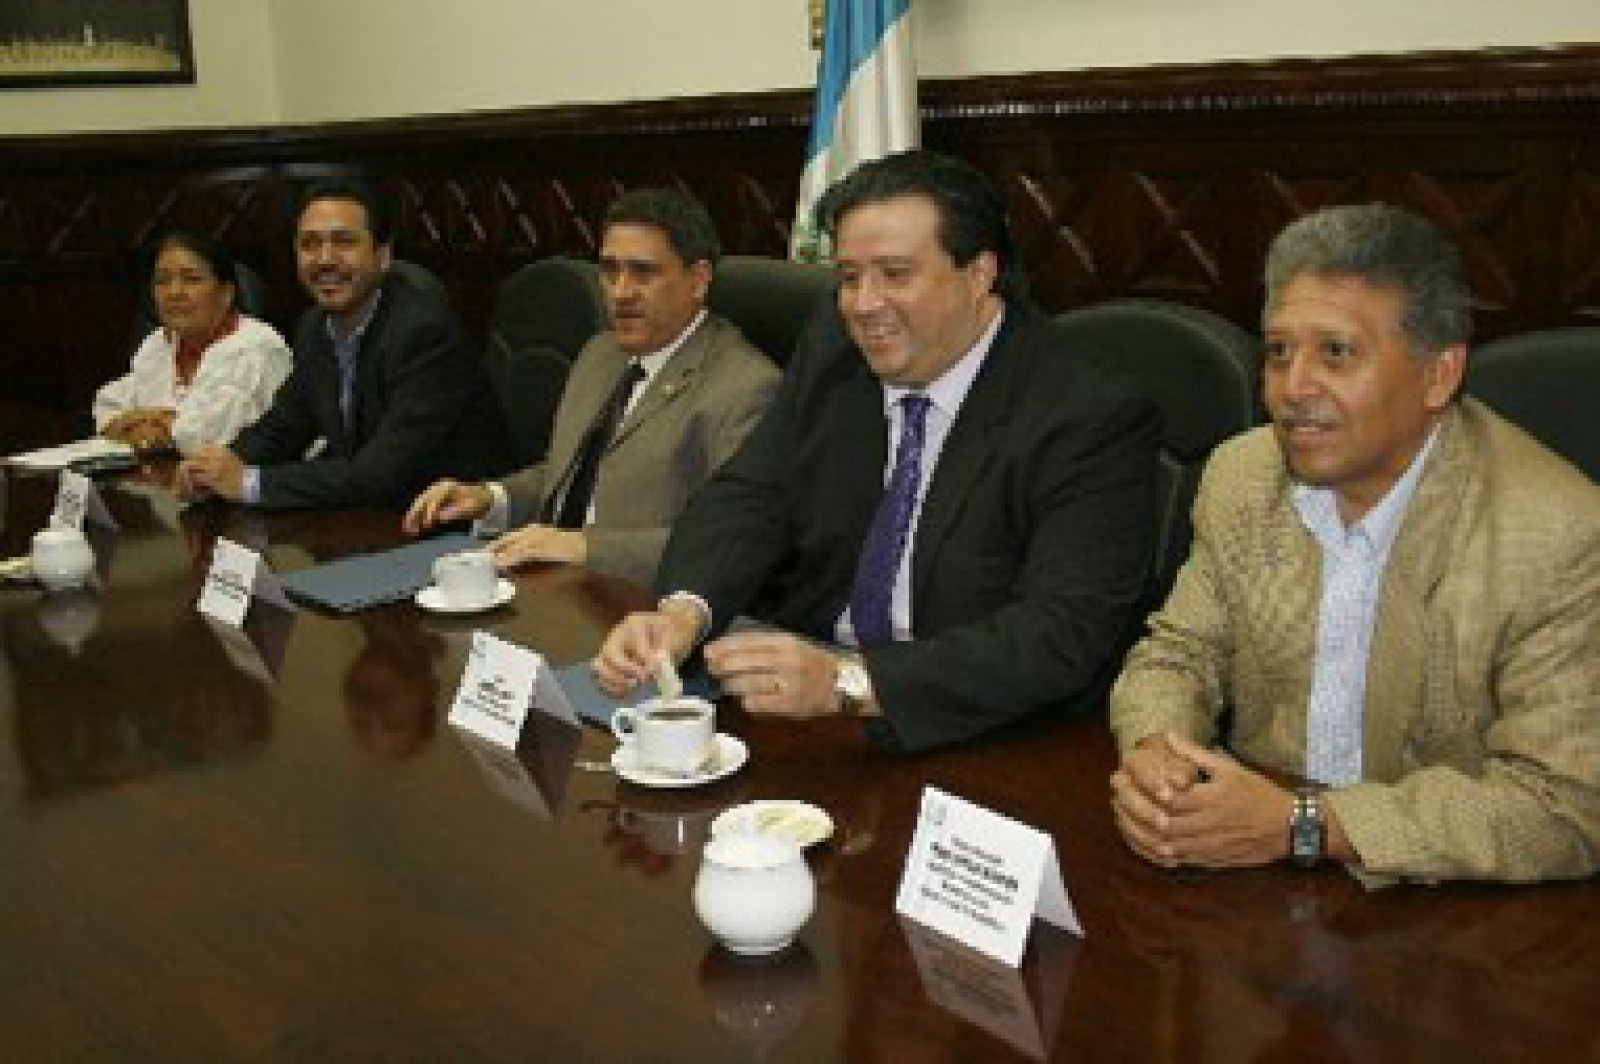 NDI and Guatemalan Congress Agree to Work on Making Government More Inclusive